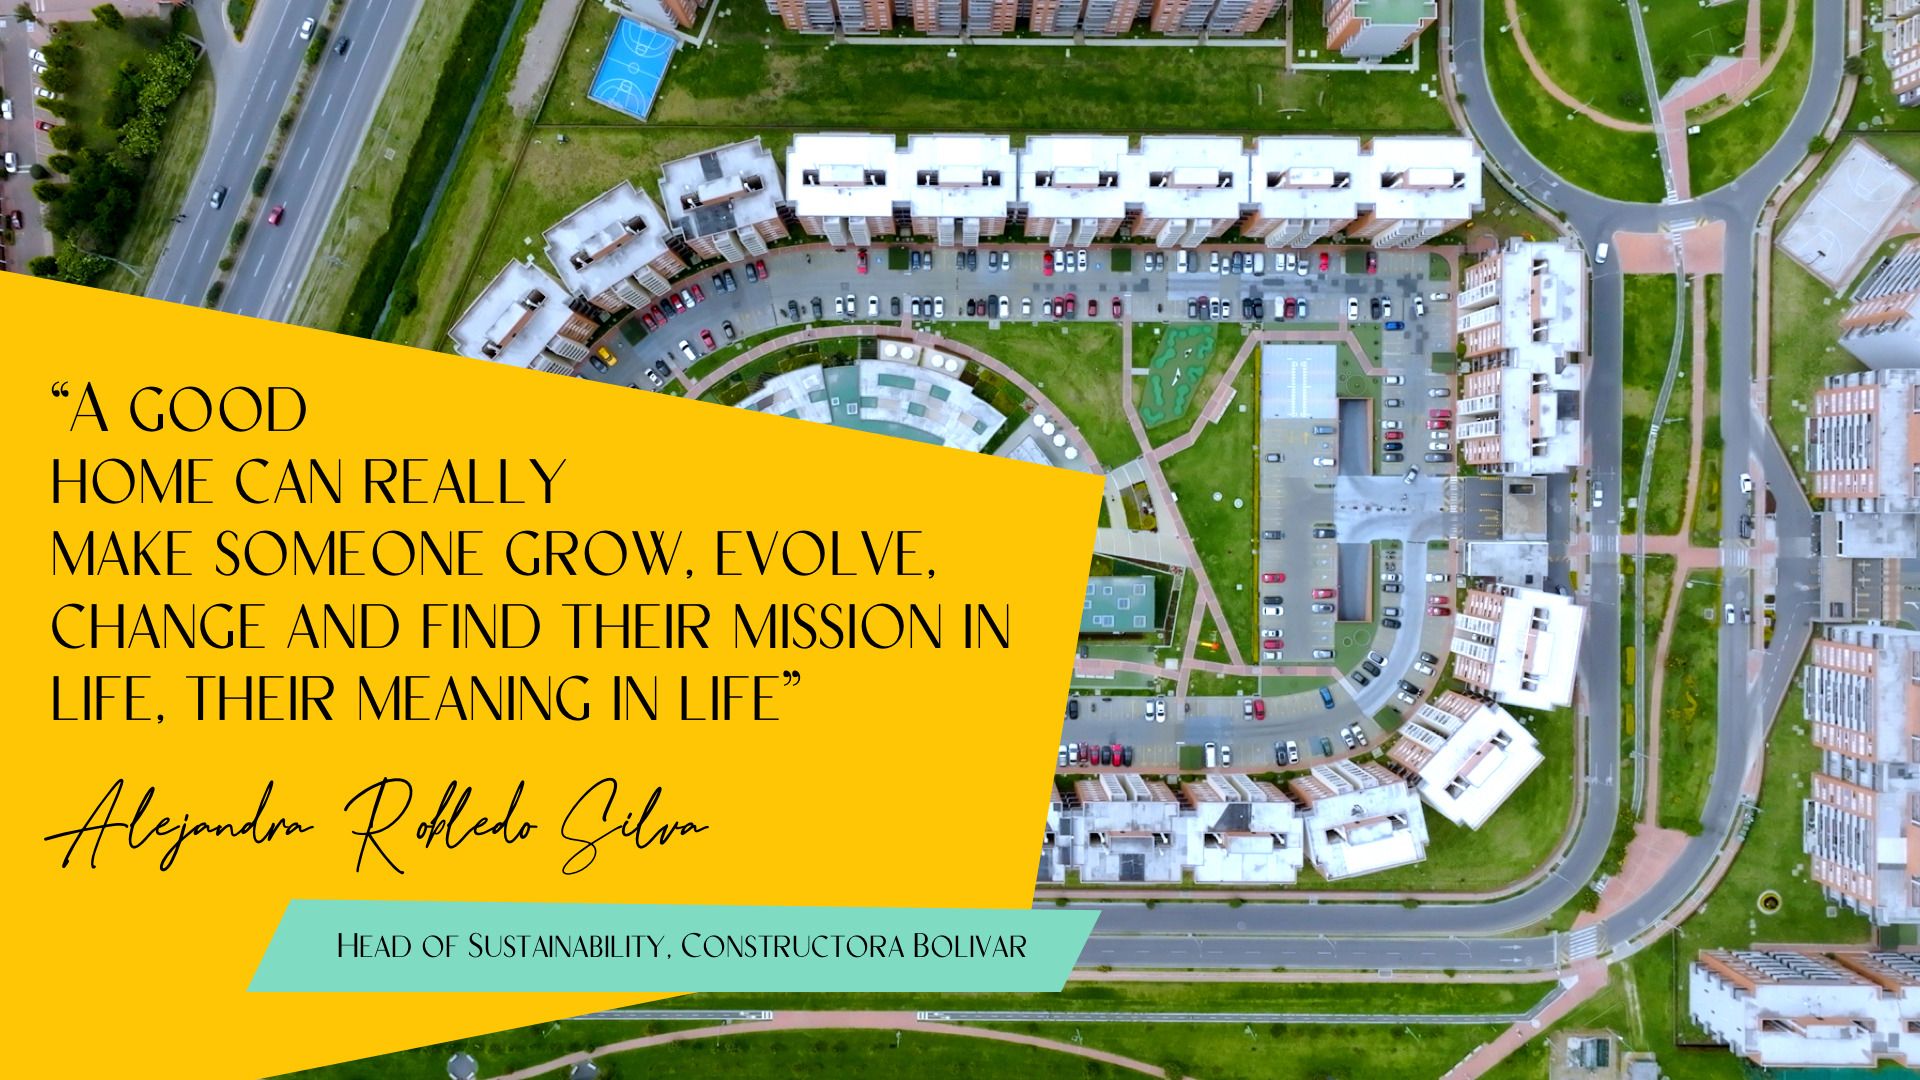 "A good home can really make someone grow, evolve, change and find their mission in life"